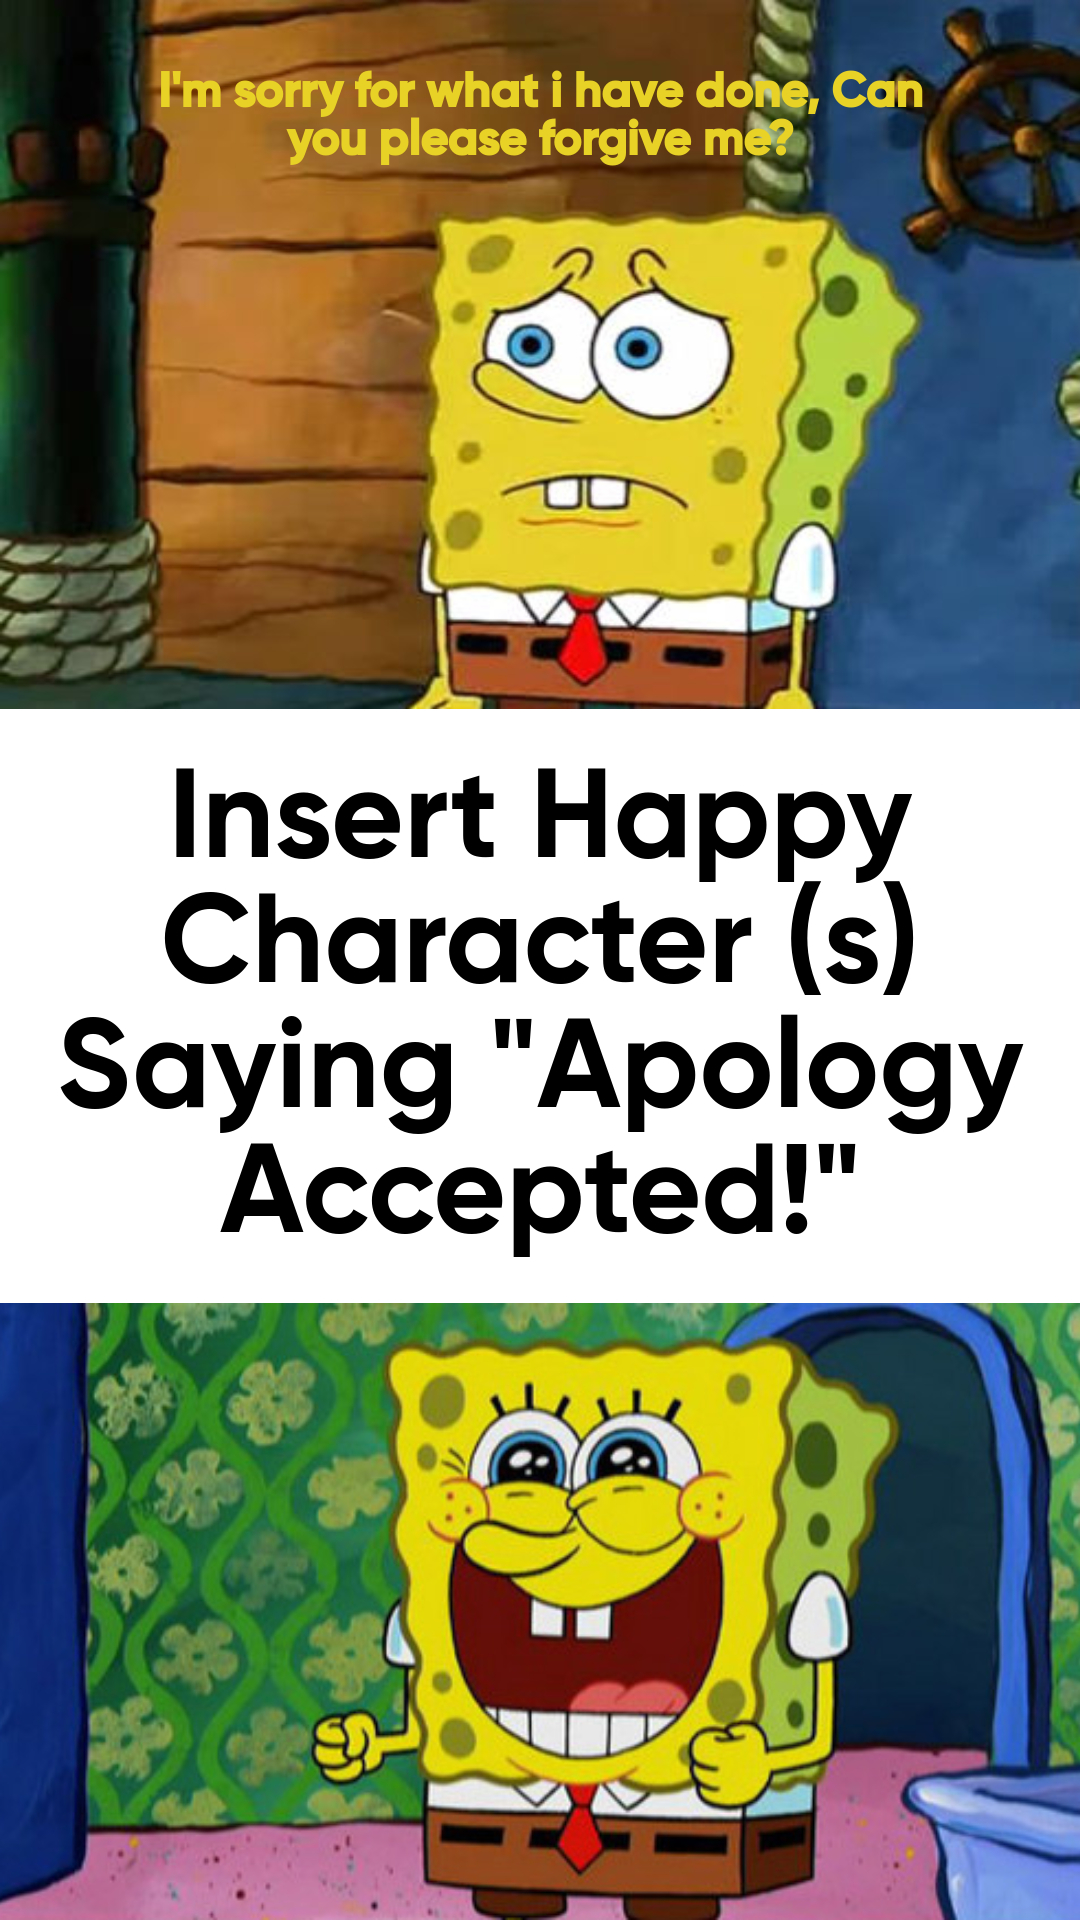 Who Accepted SpongeBob's Apology by zmcdonald09 on DeviantArt